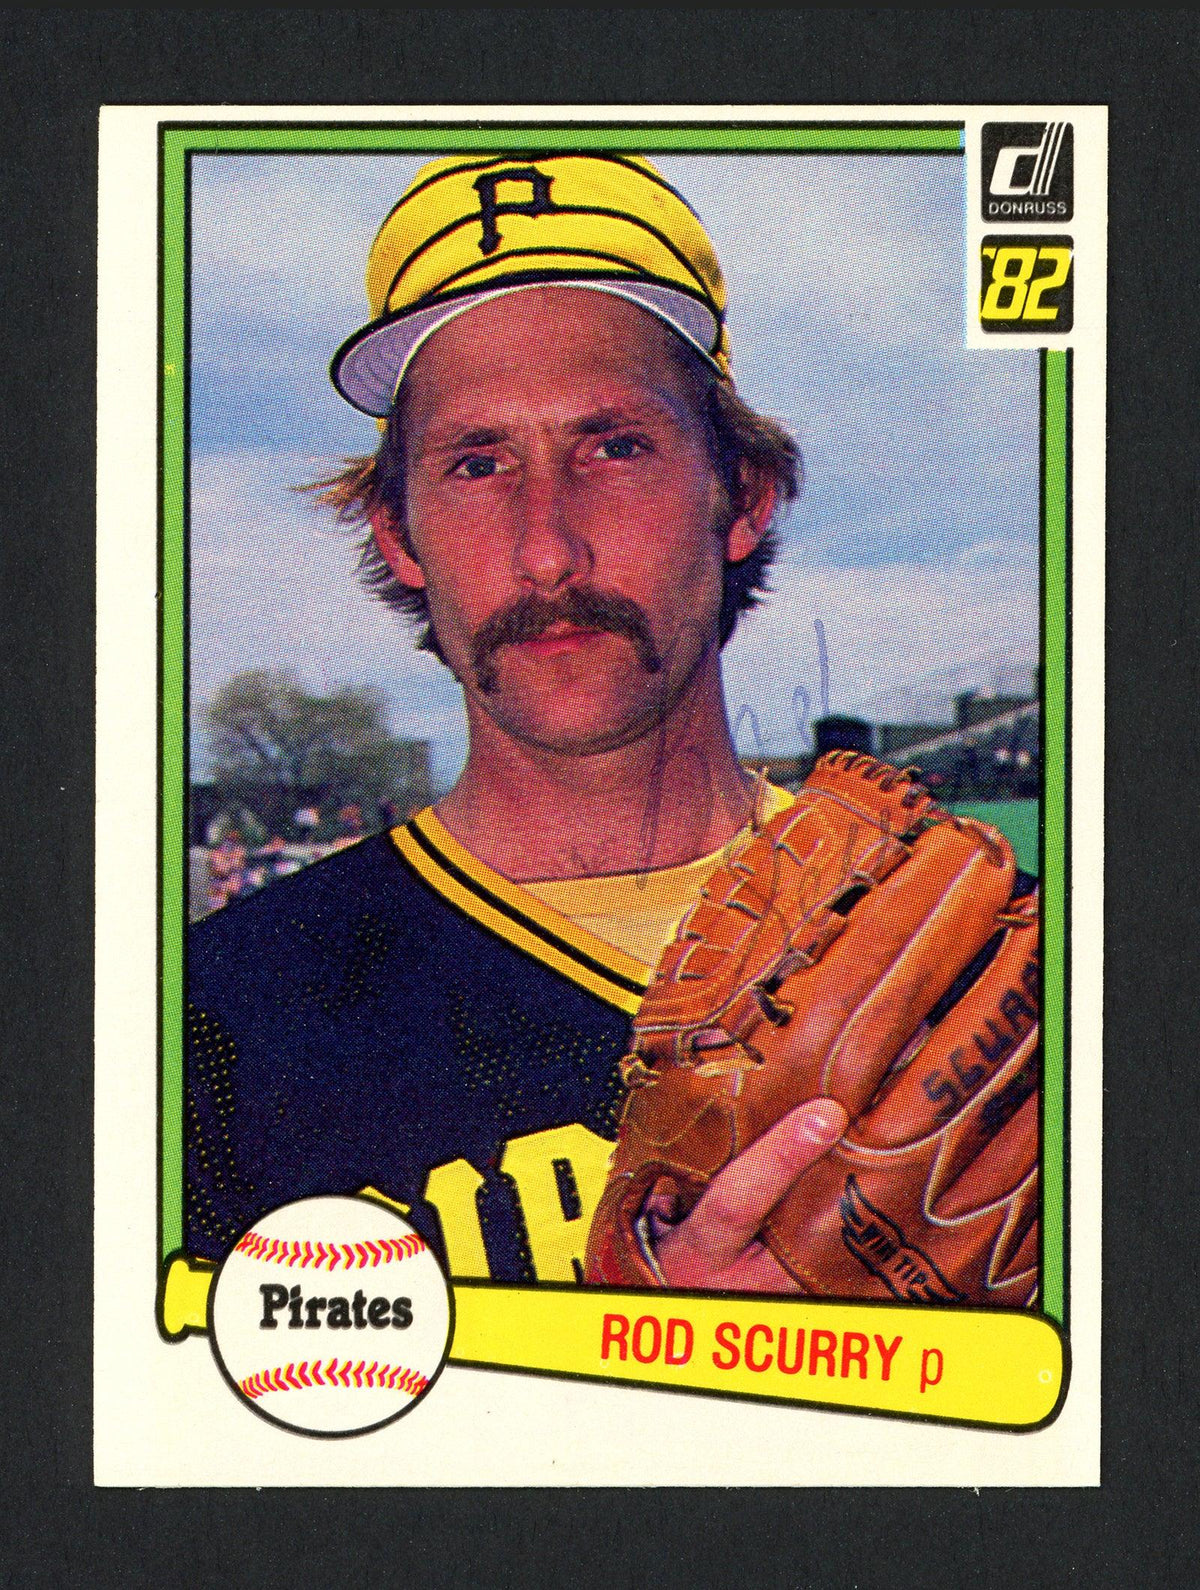 Rod Scurry